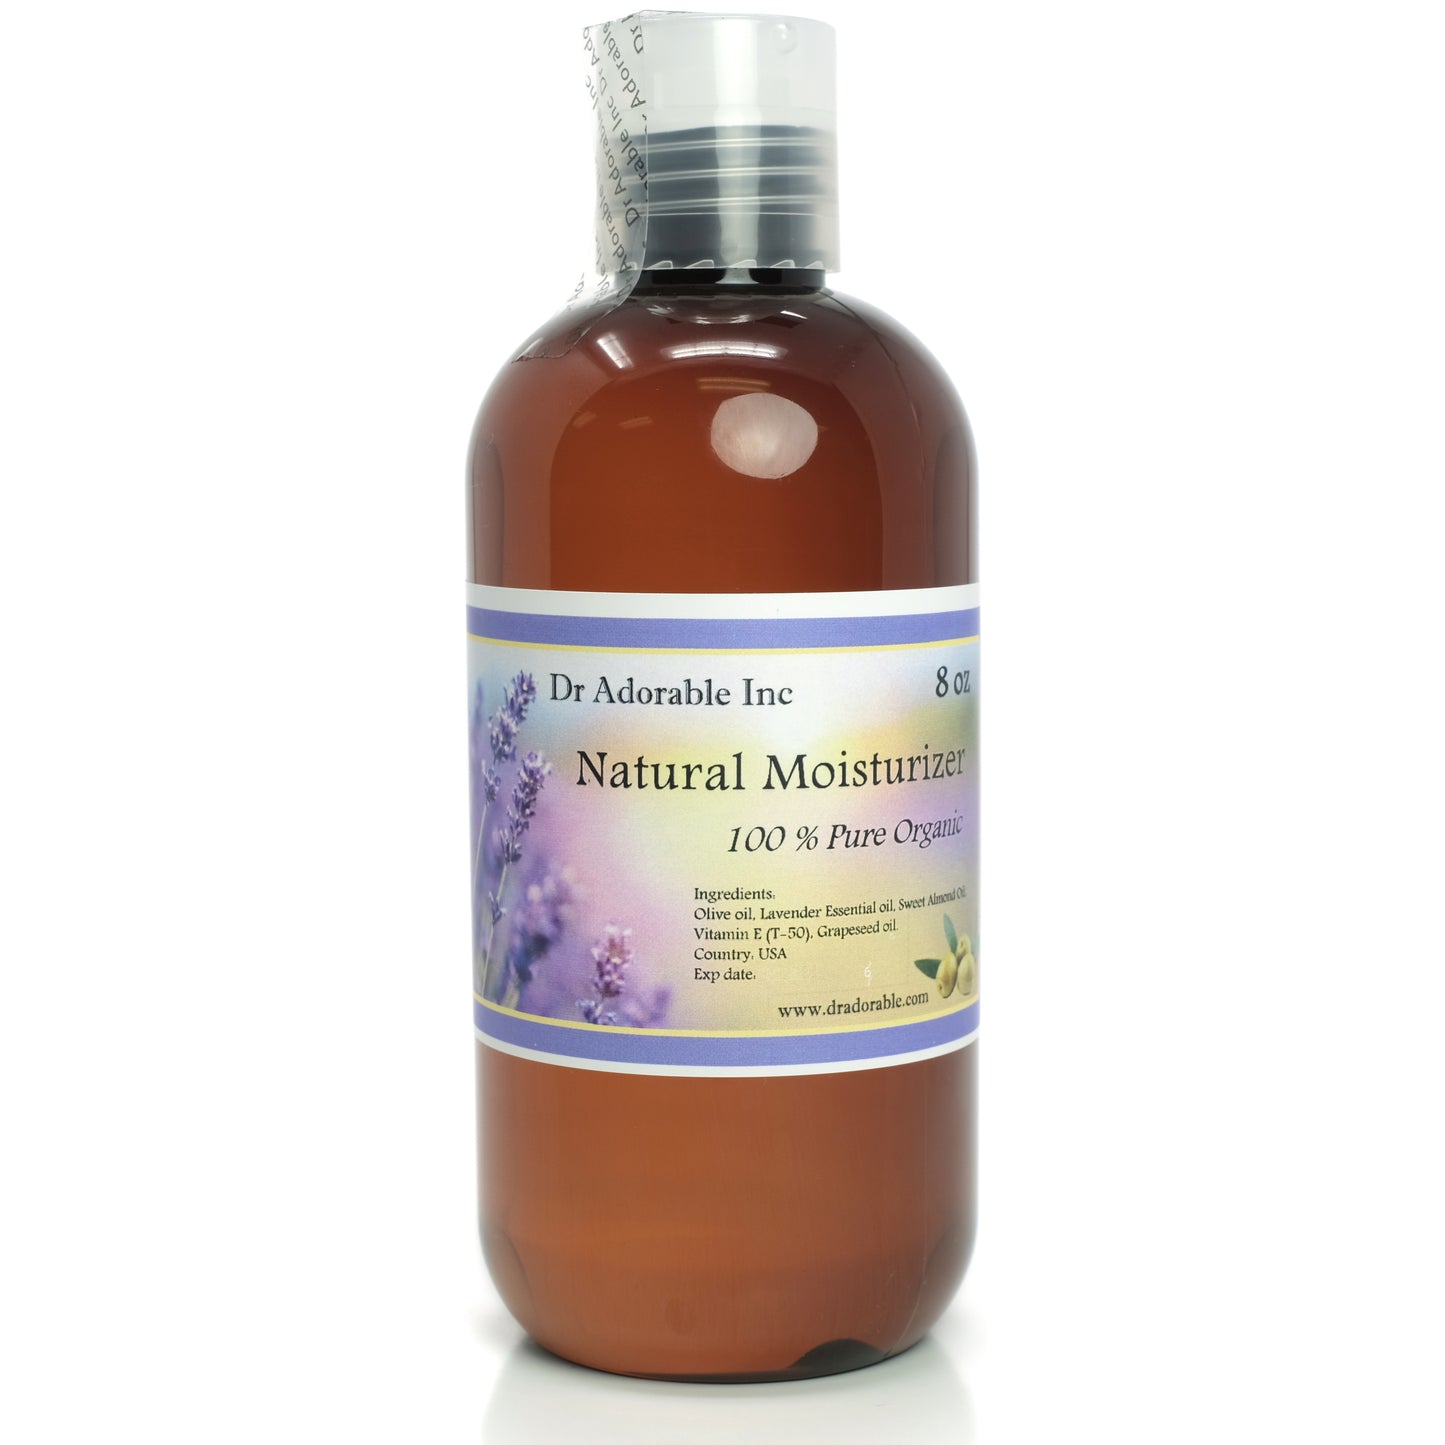 Natural Moisturizer - for Dry Skin and Hair with Olive, Lavender, Almond, Vitamin E and Grapeseed Oils Blend